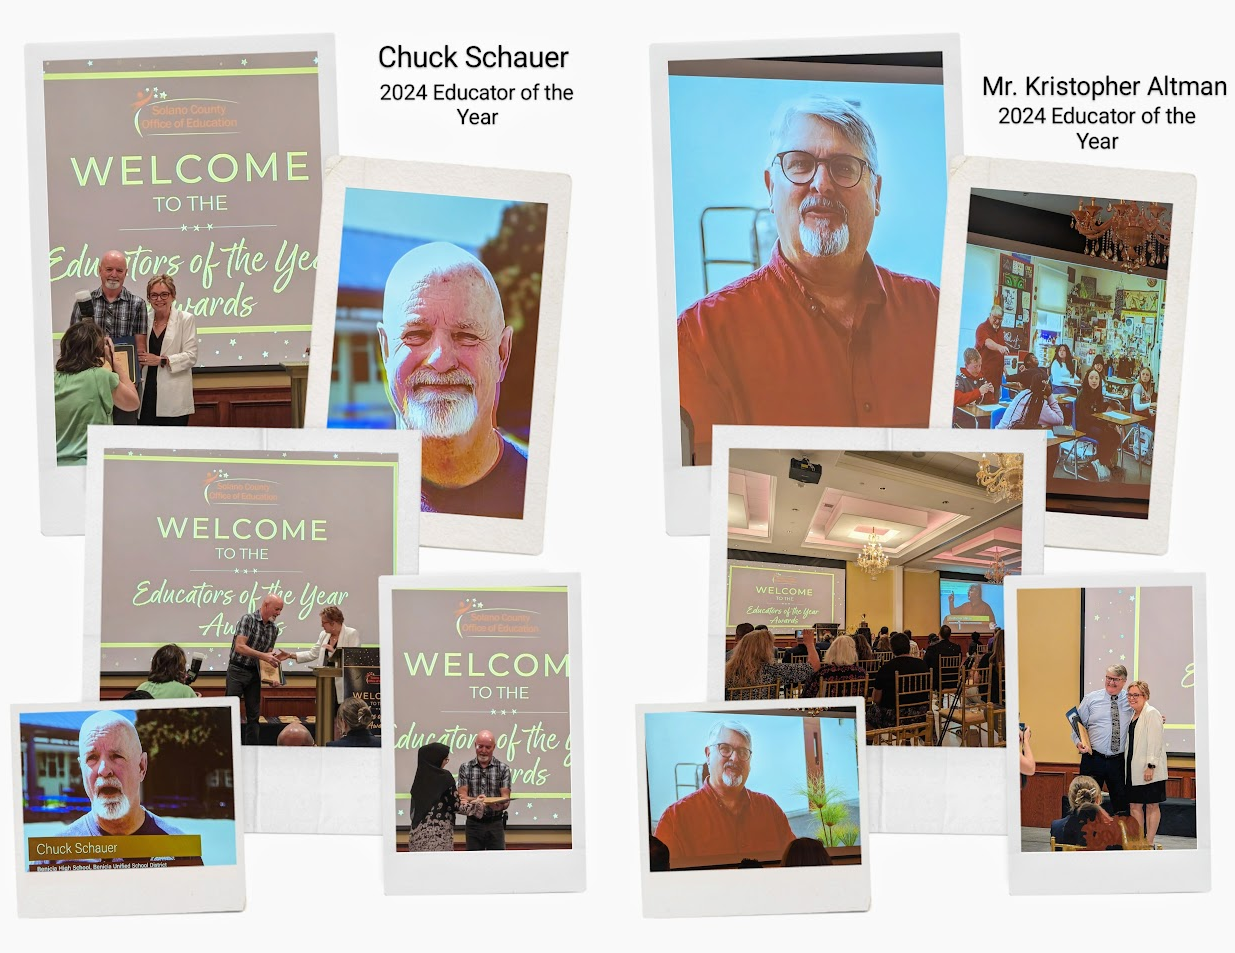 Chuck Schauer 2024 educator of the year | Mr. Kristopher Altman 2024 educator of the year